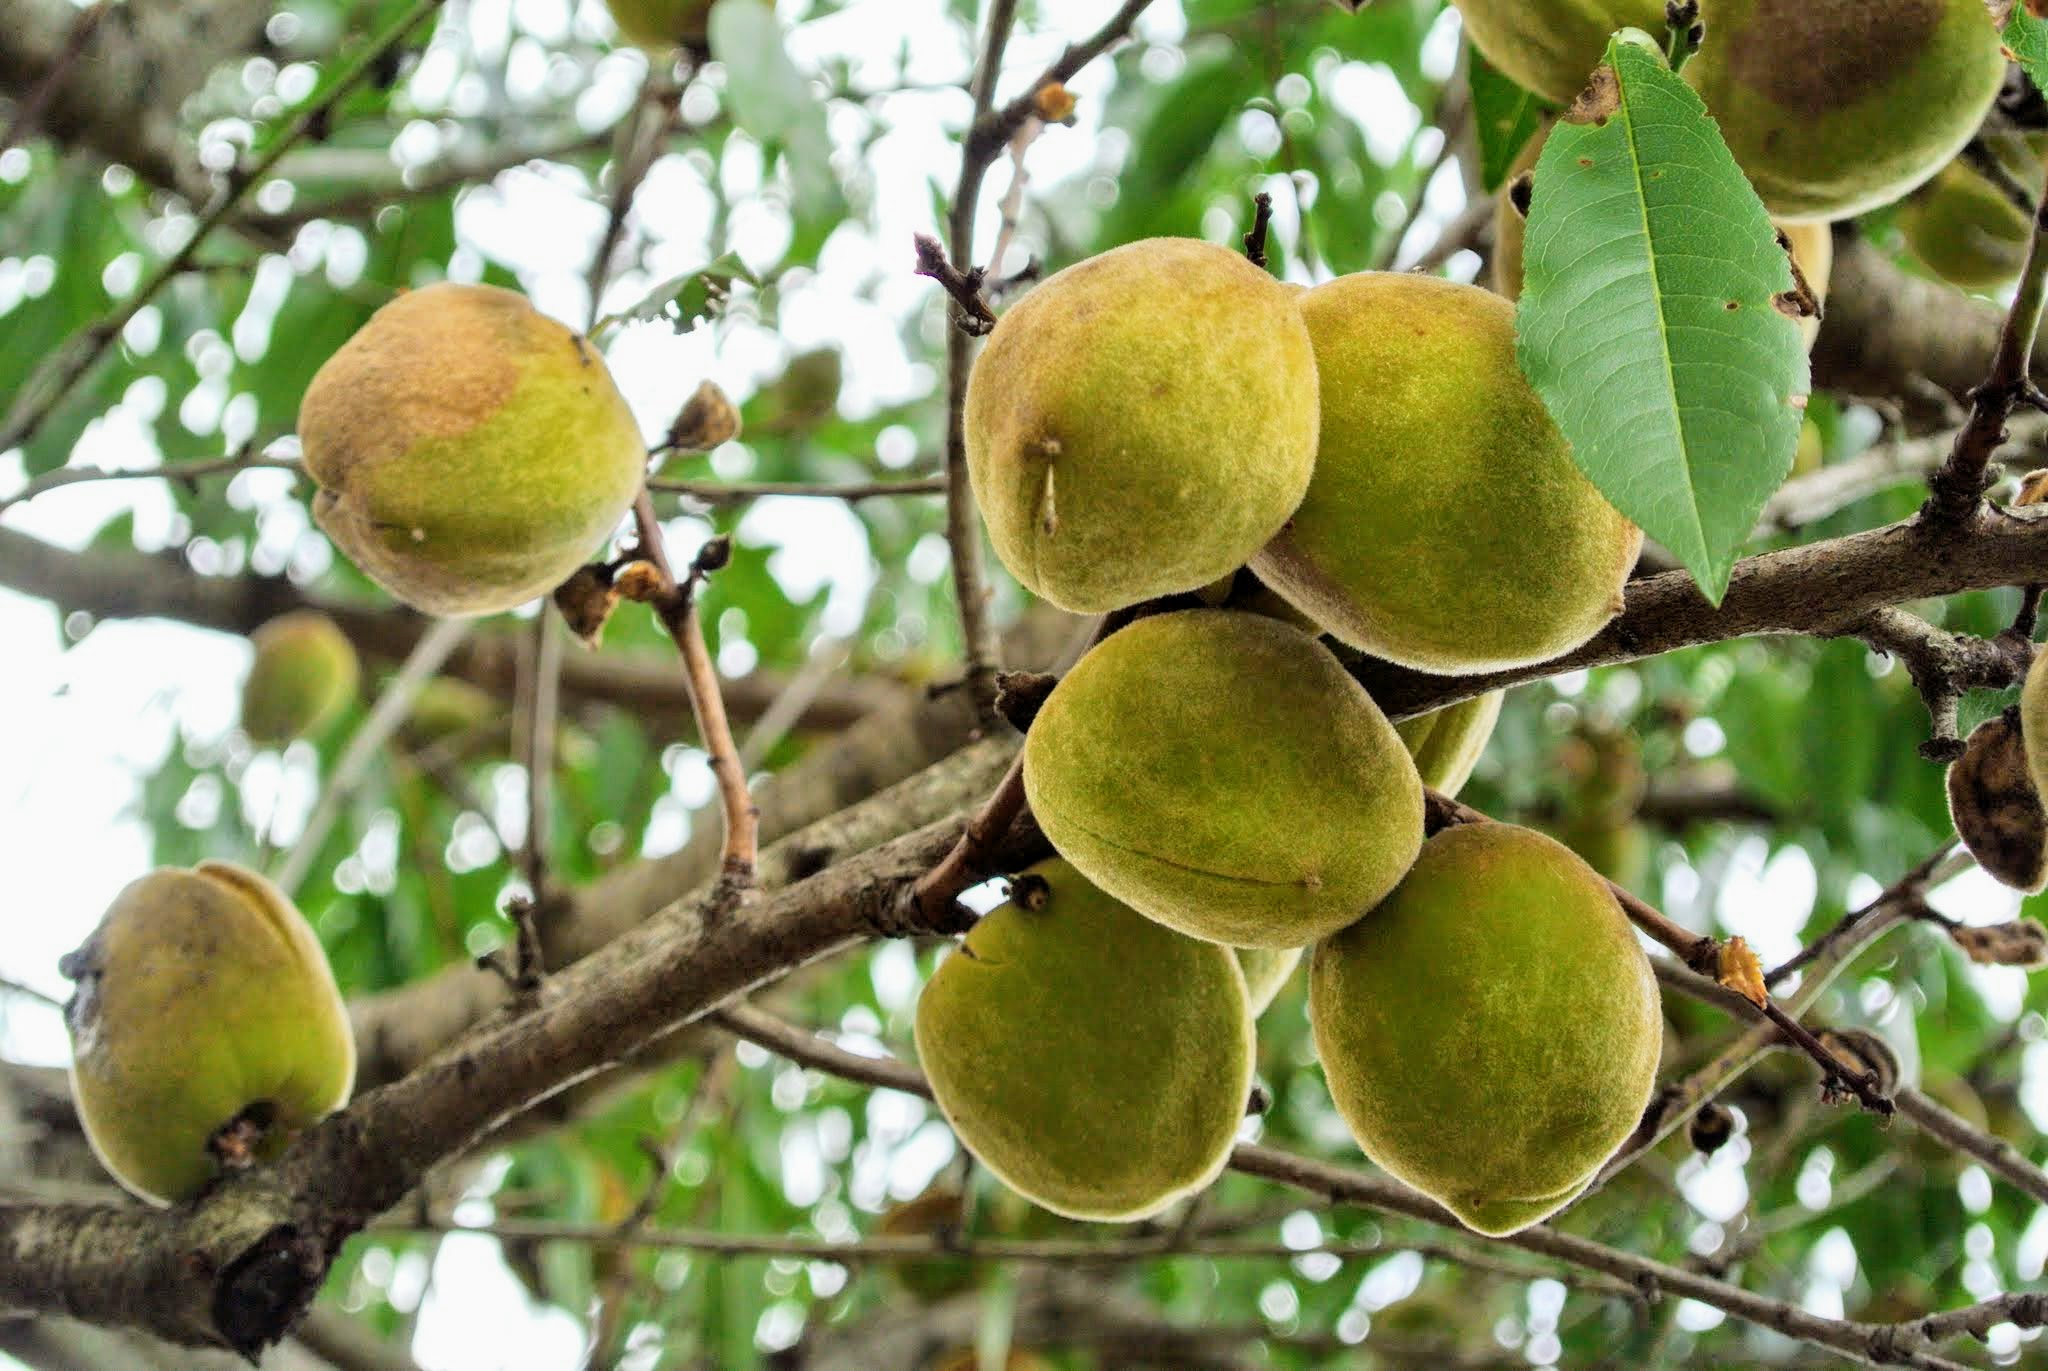 Caring for My Almond Trees - The Martha Stewart Blog